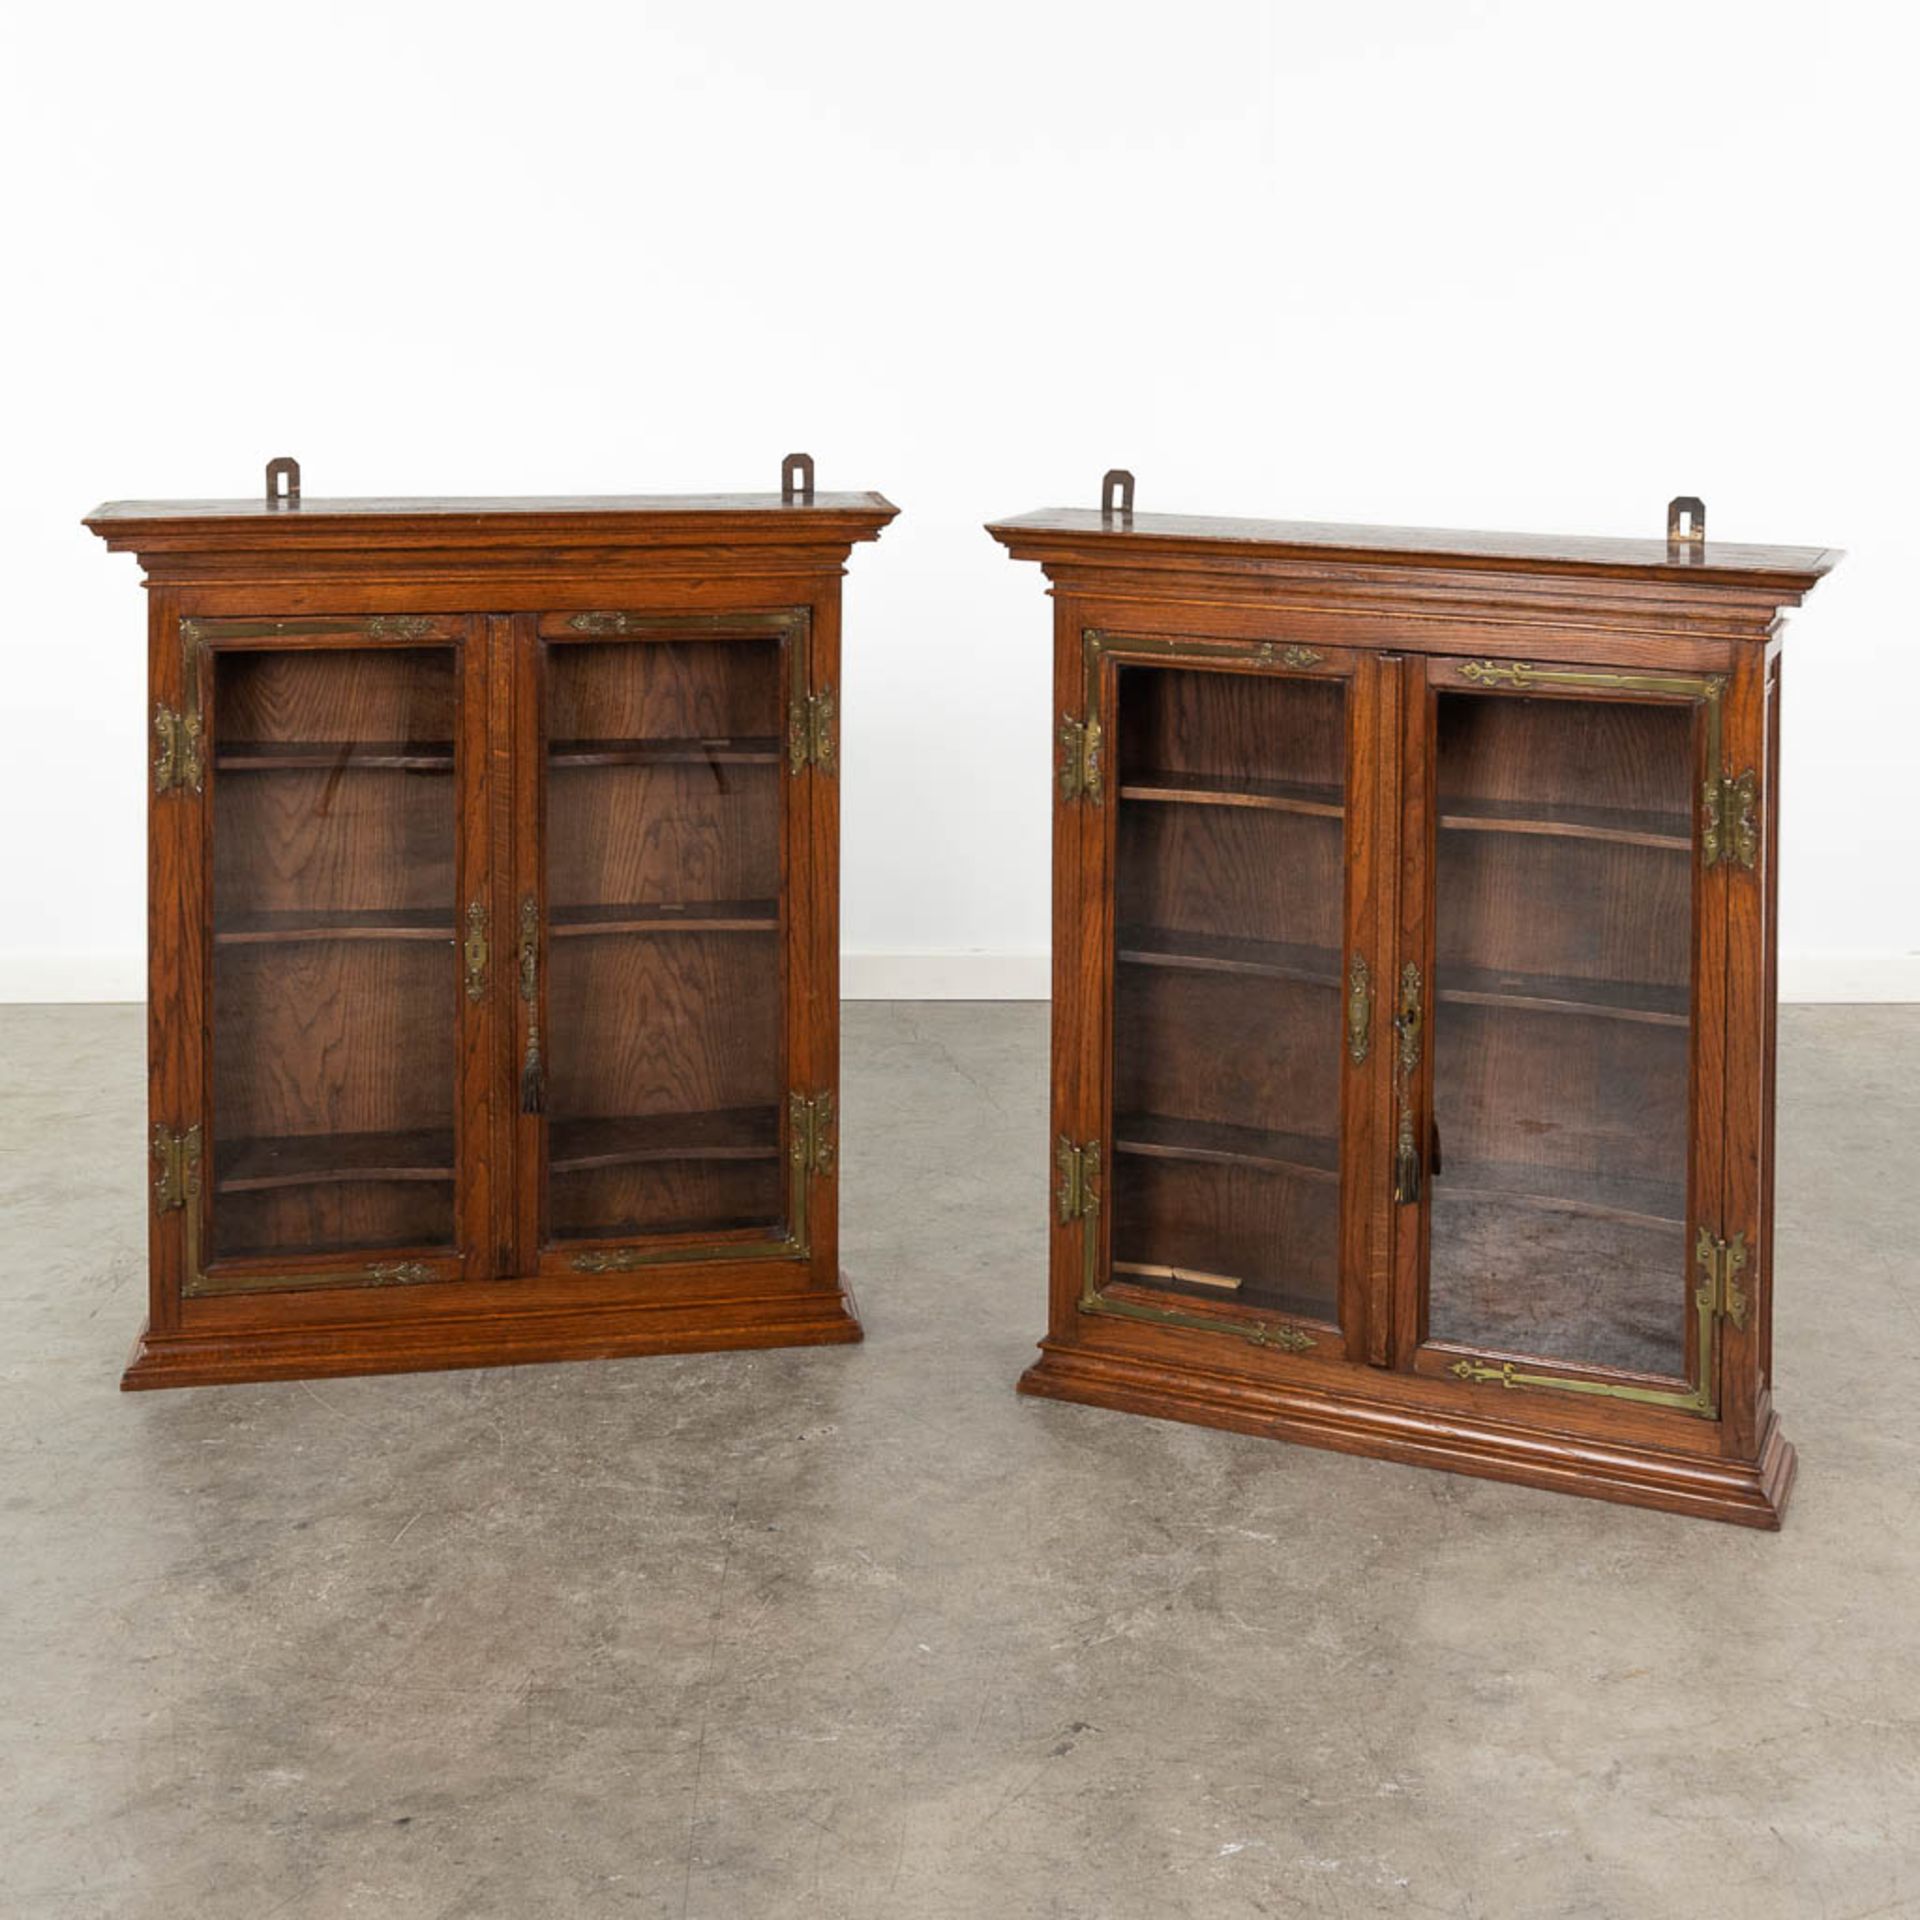 A pair of hanging cabinets, wood and glass. Circa 1900. (L: 17 x W: 75 x H: 83 cm)